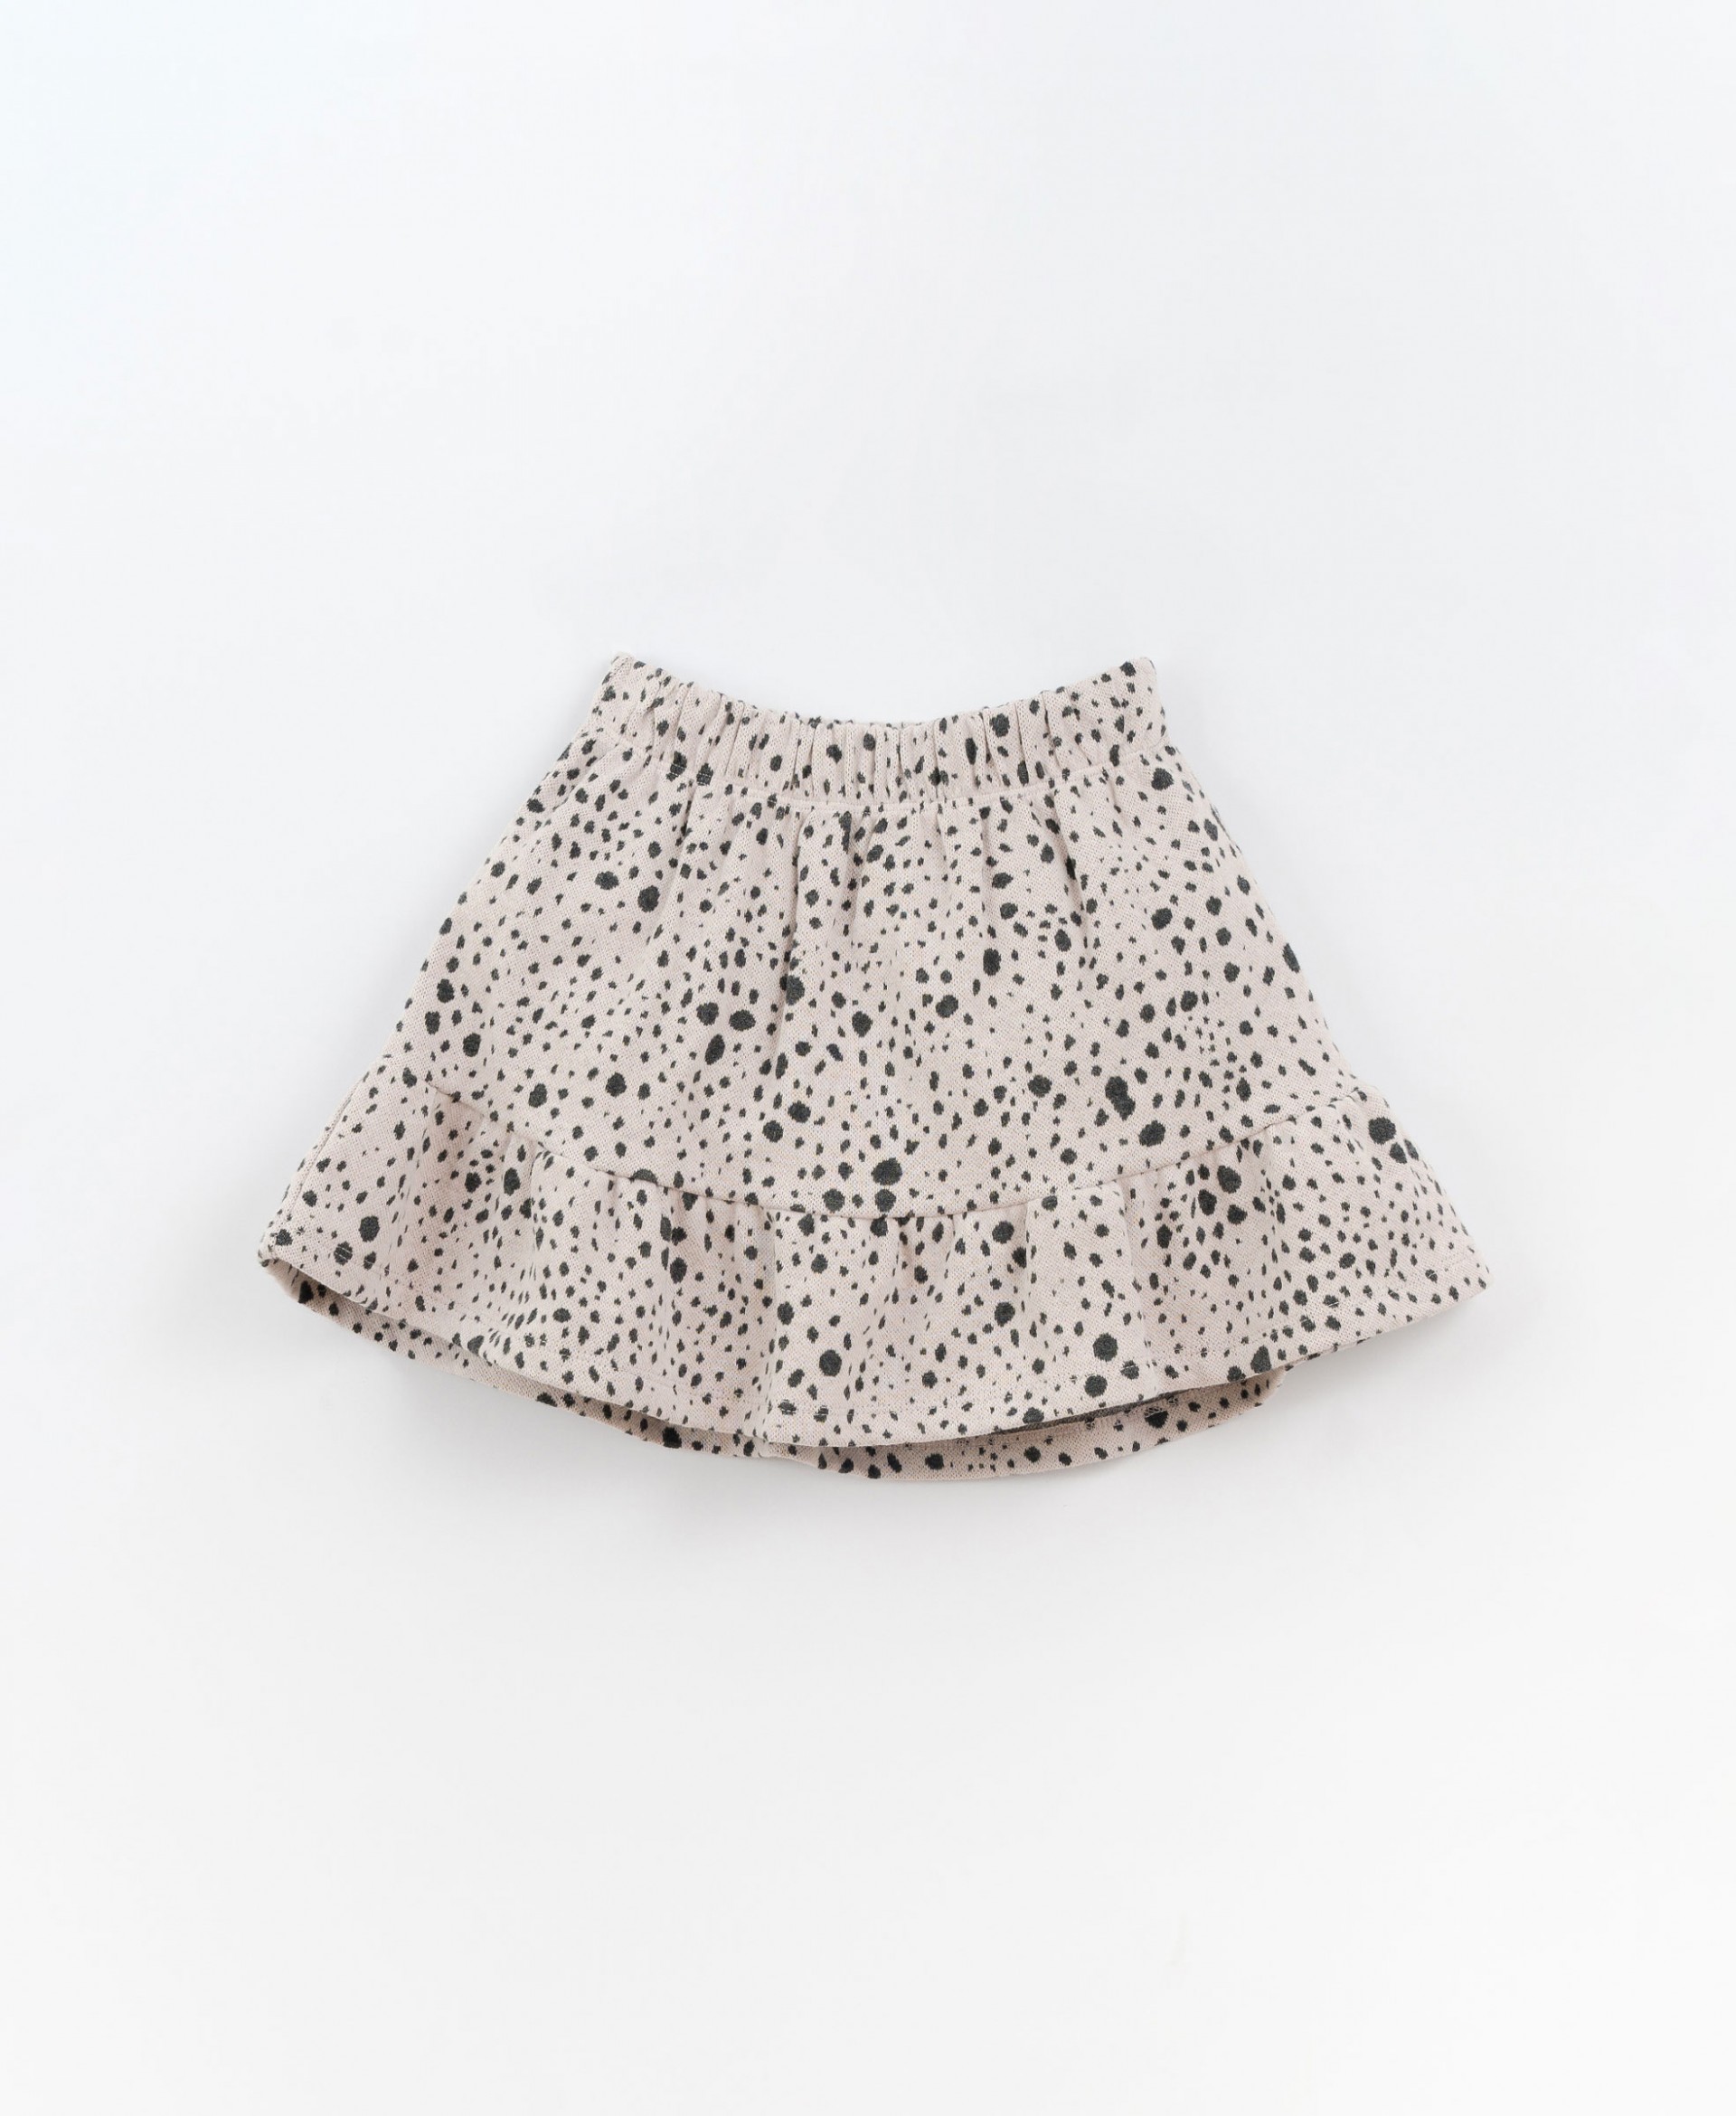 Skirt with leaf detail | Culinary